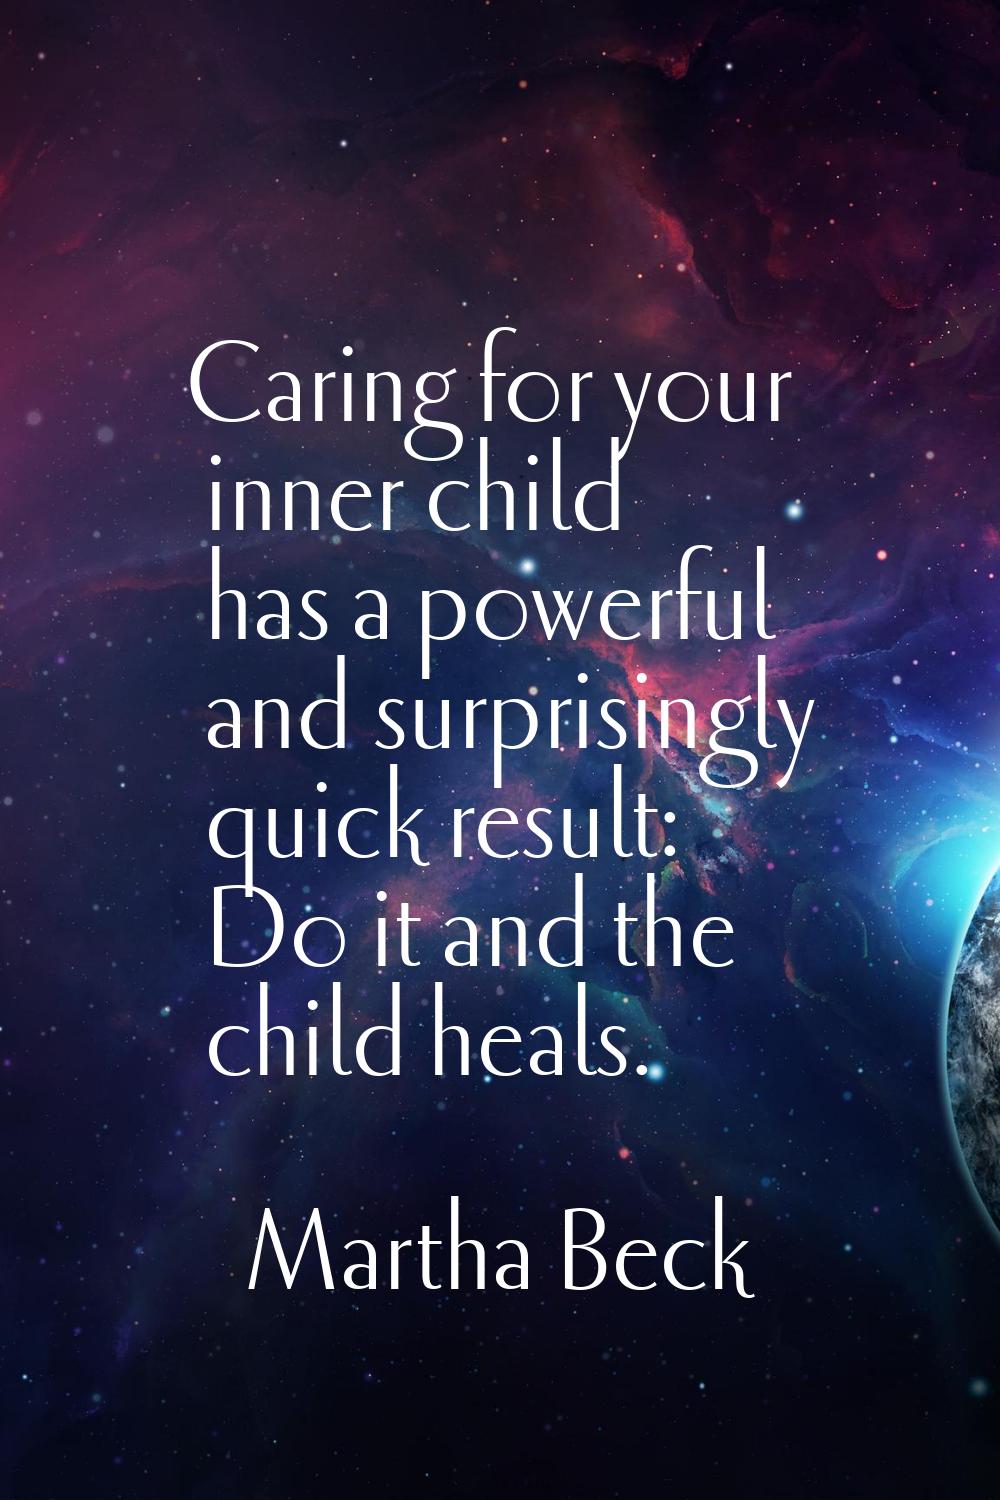 Caring for your inner child has a powerful and surprisingly quick result: Do it and the child heals